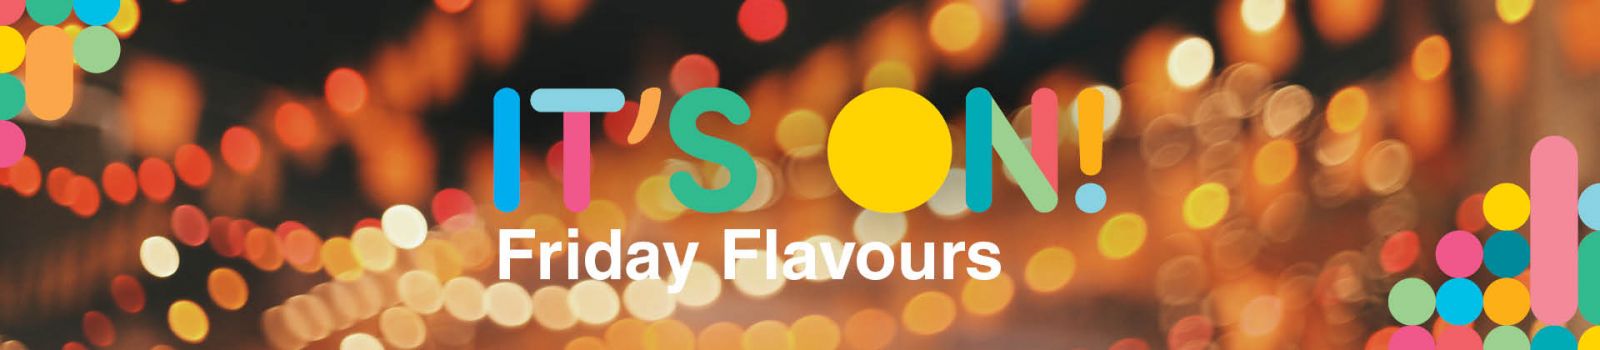 Friday flavours banner banner image